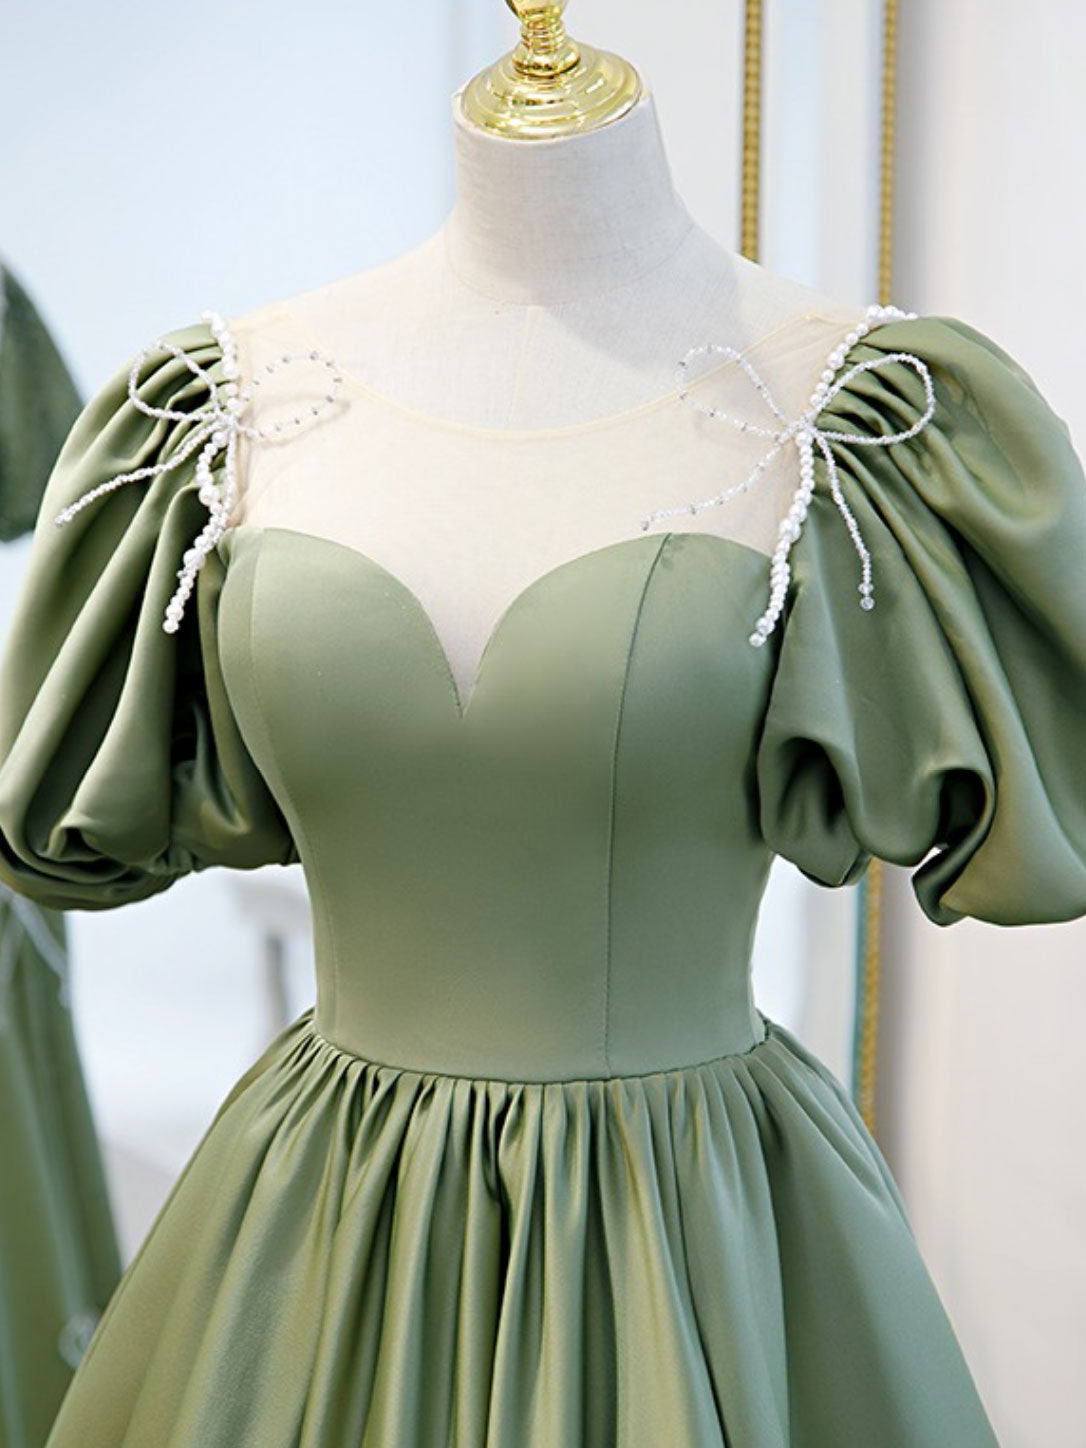 Sage Green Satin Short Homecoming Dress 8th Grade Dance Dress with Bubble Sleeves - DollyGown